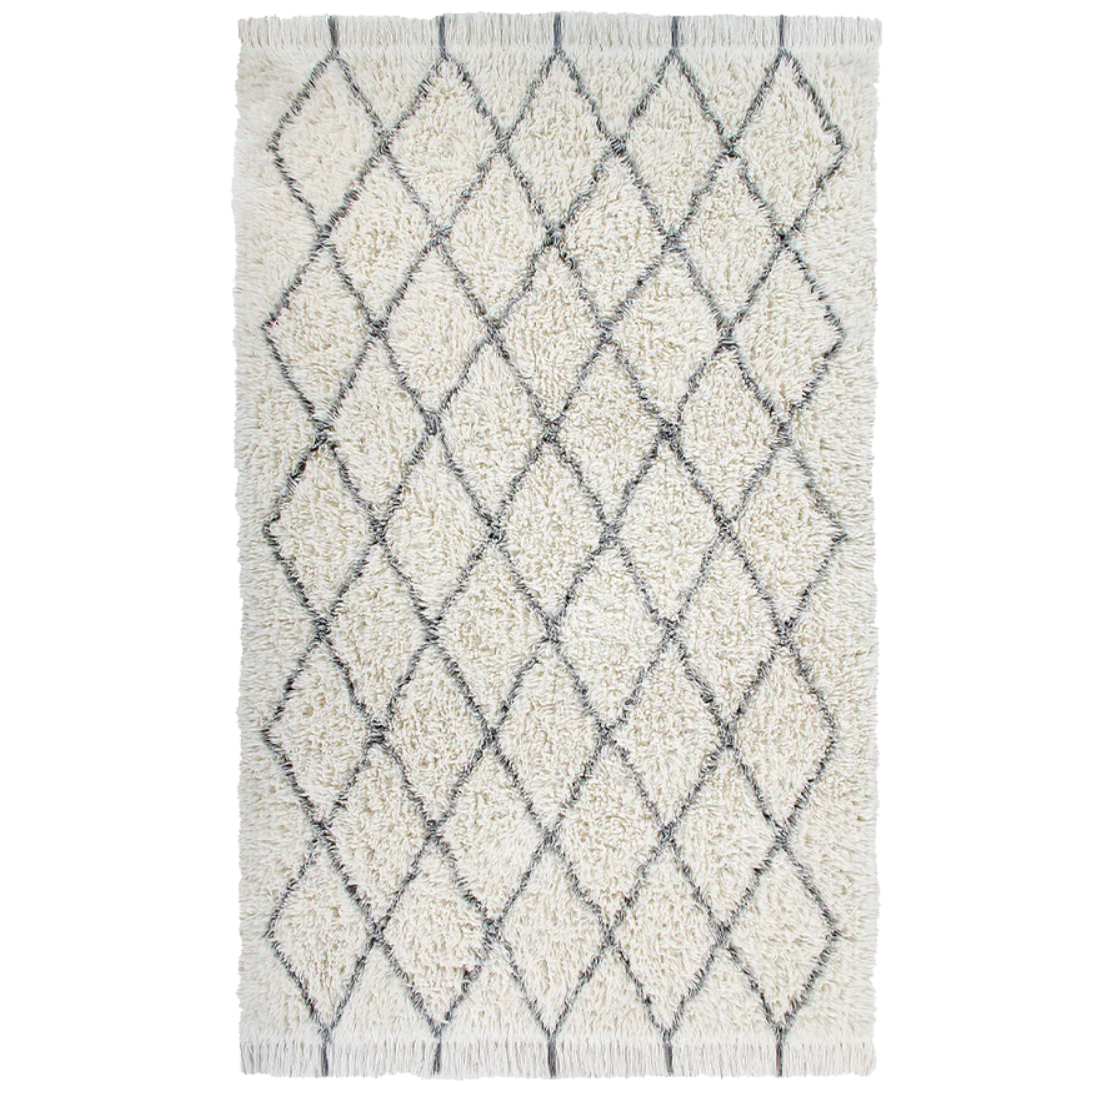 Lorena Canals Woolable Rug Berber Soul